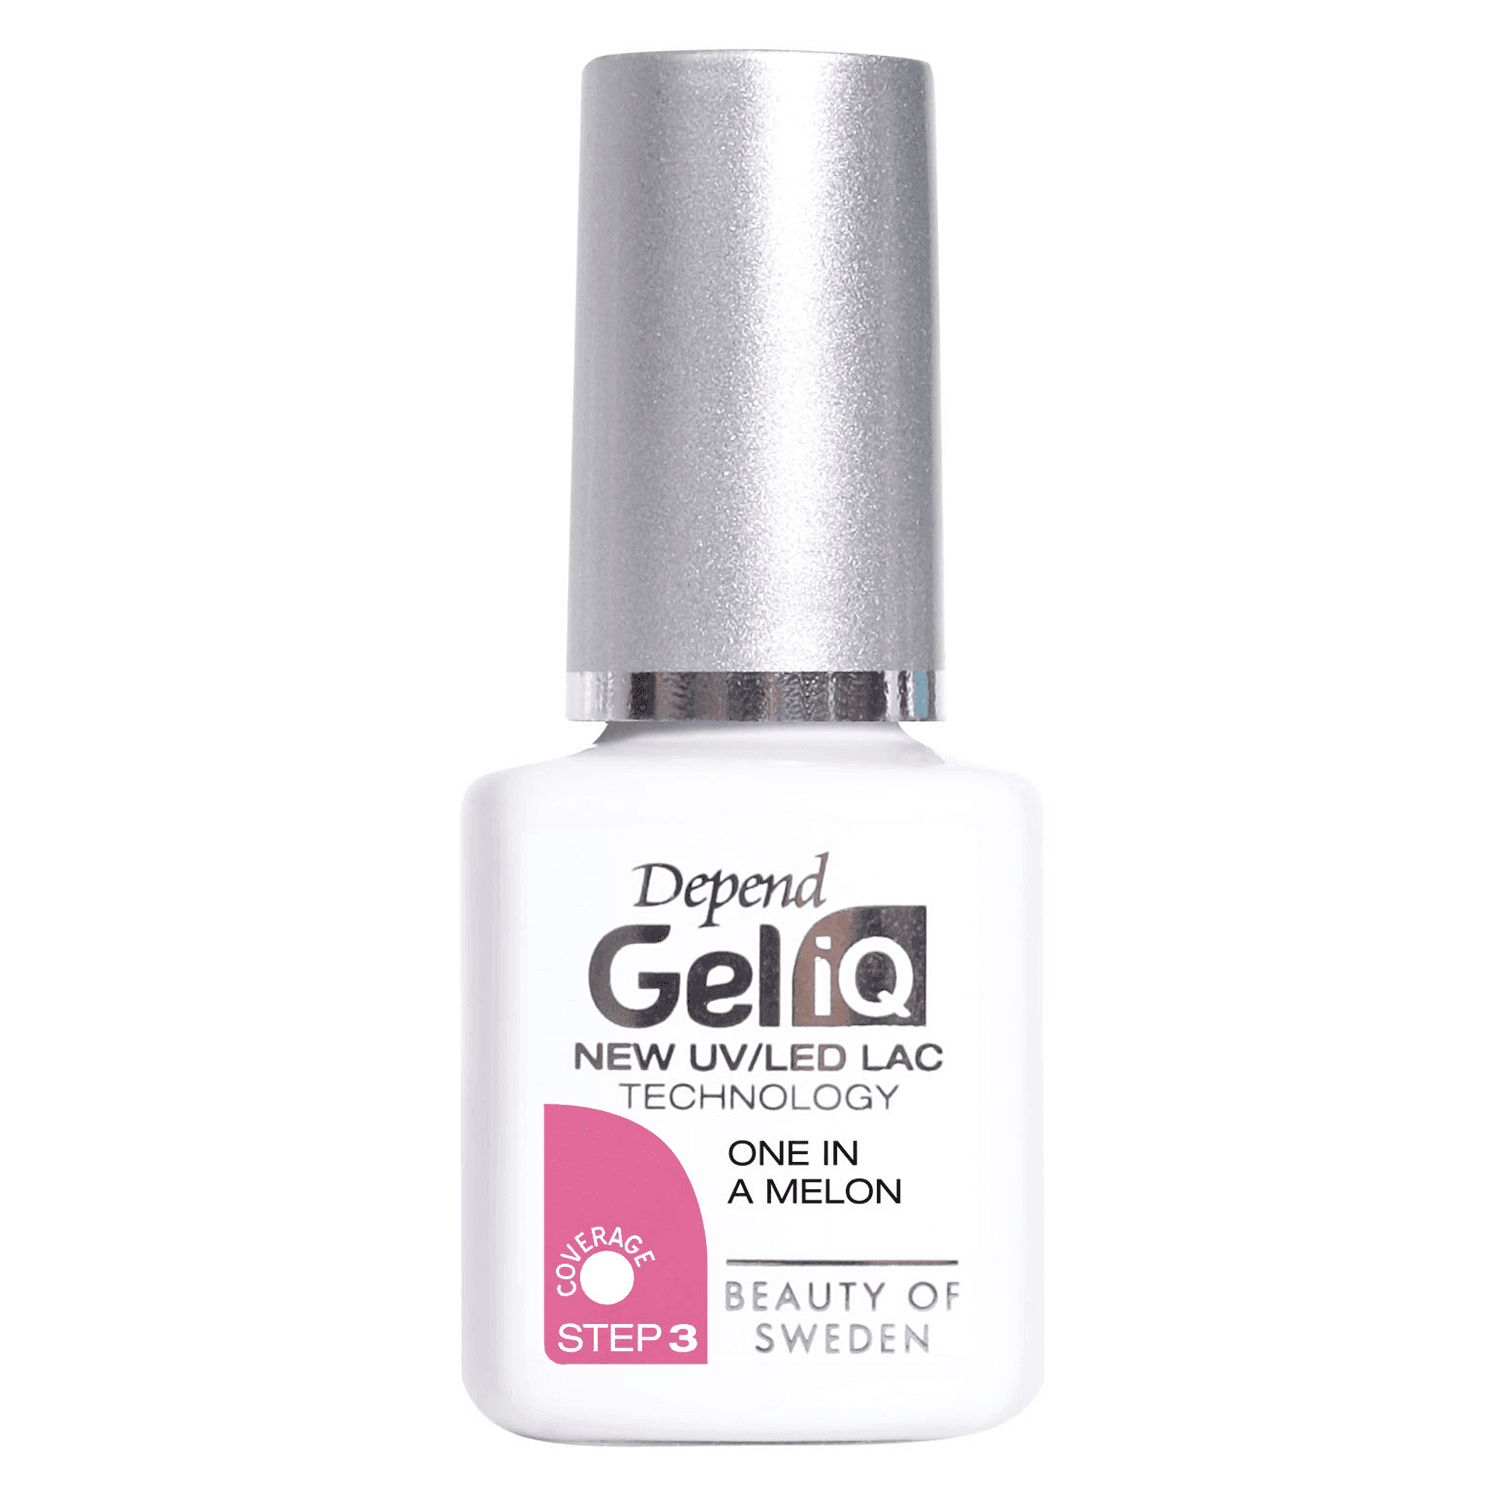 Gel iQ Color - One in a Melon